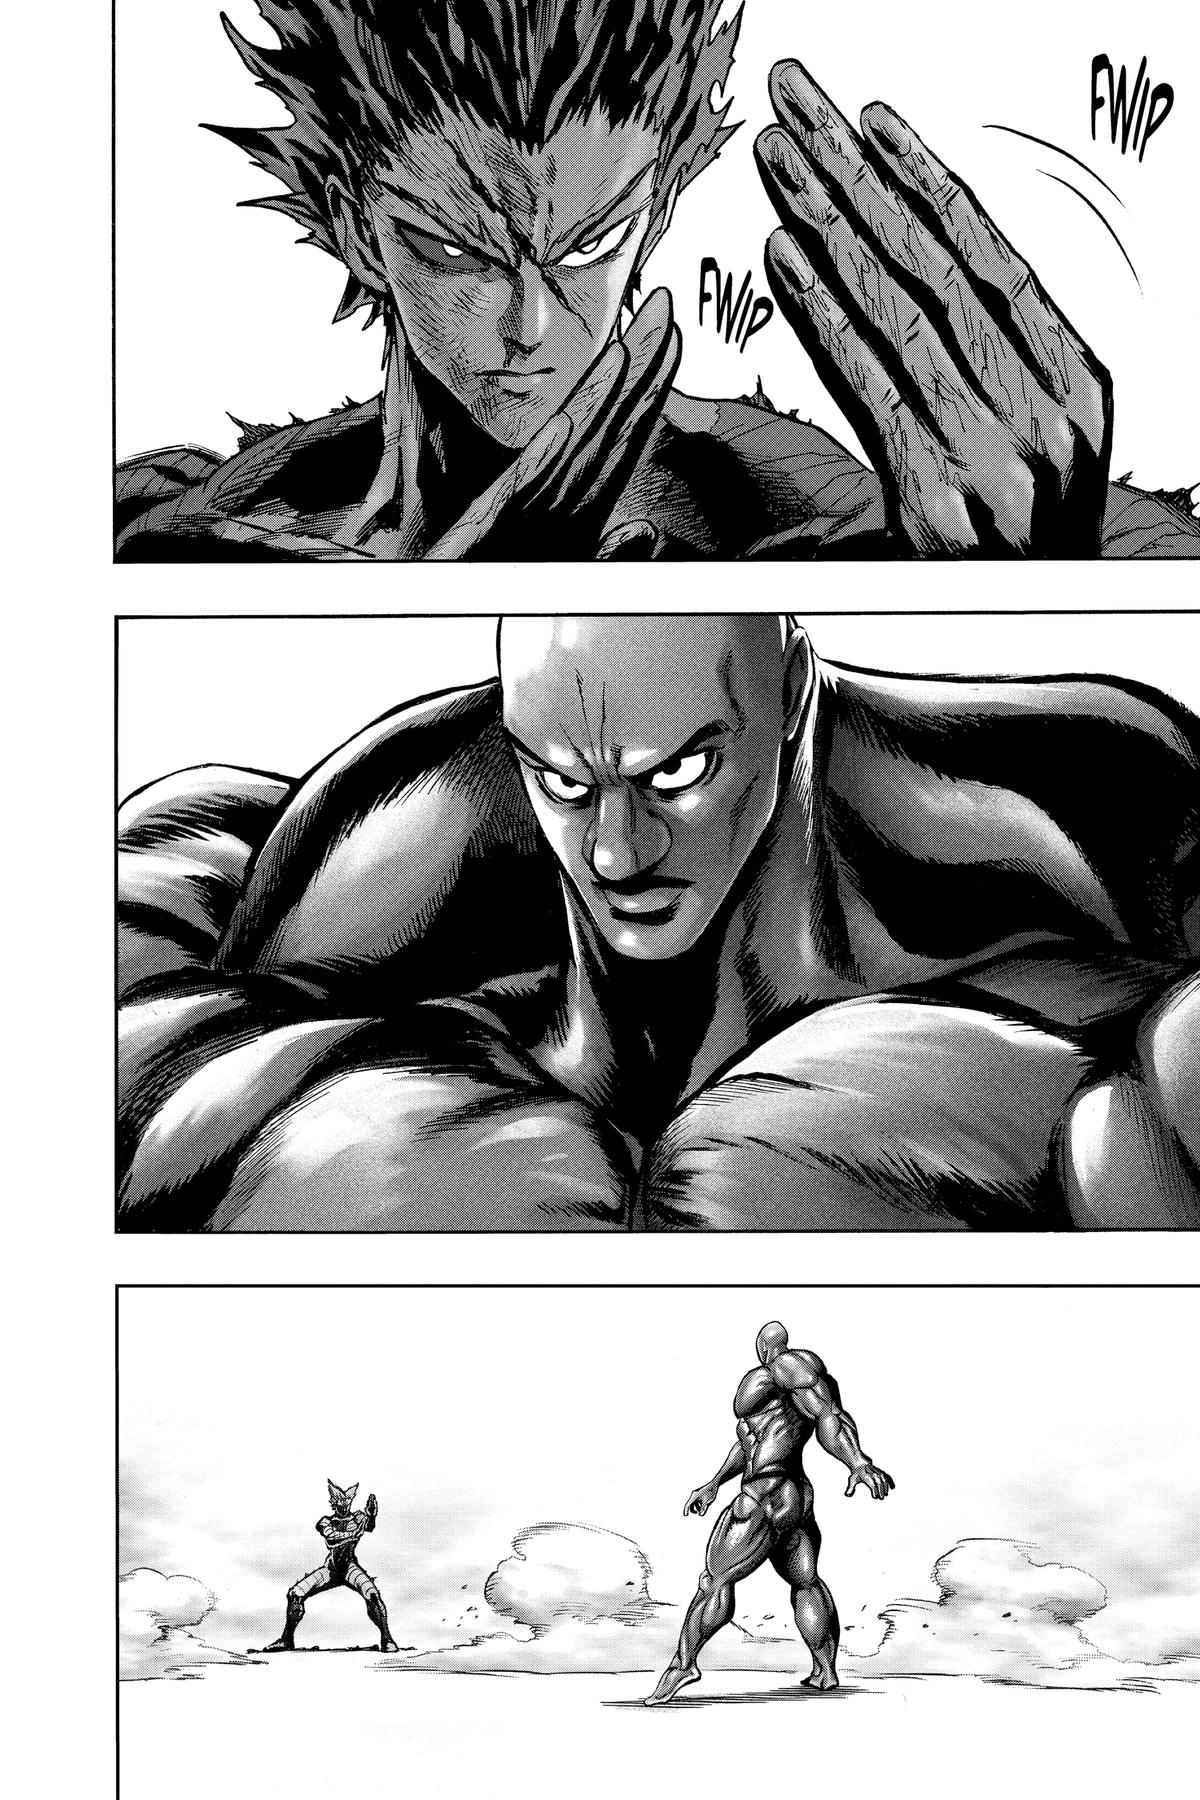 One-Punch Man, Punch 130 image 11